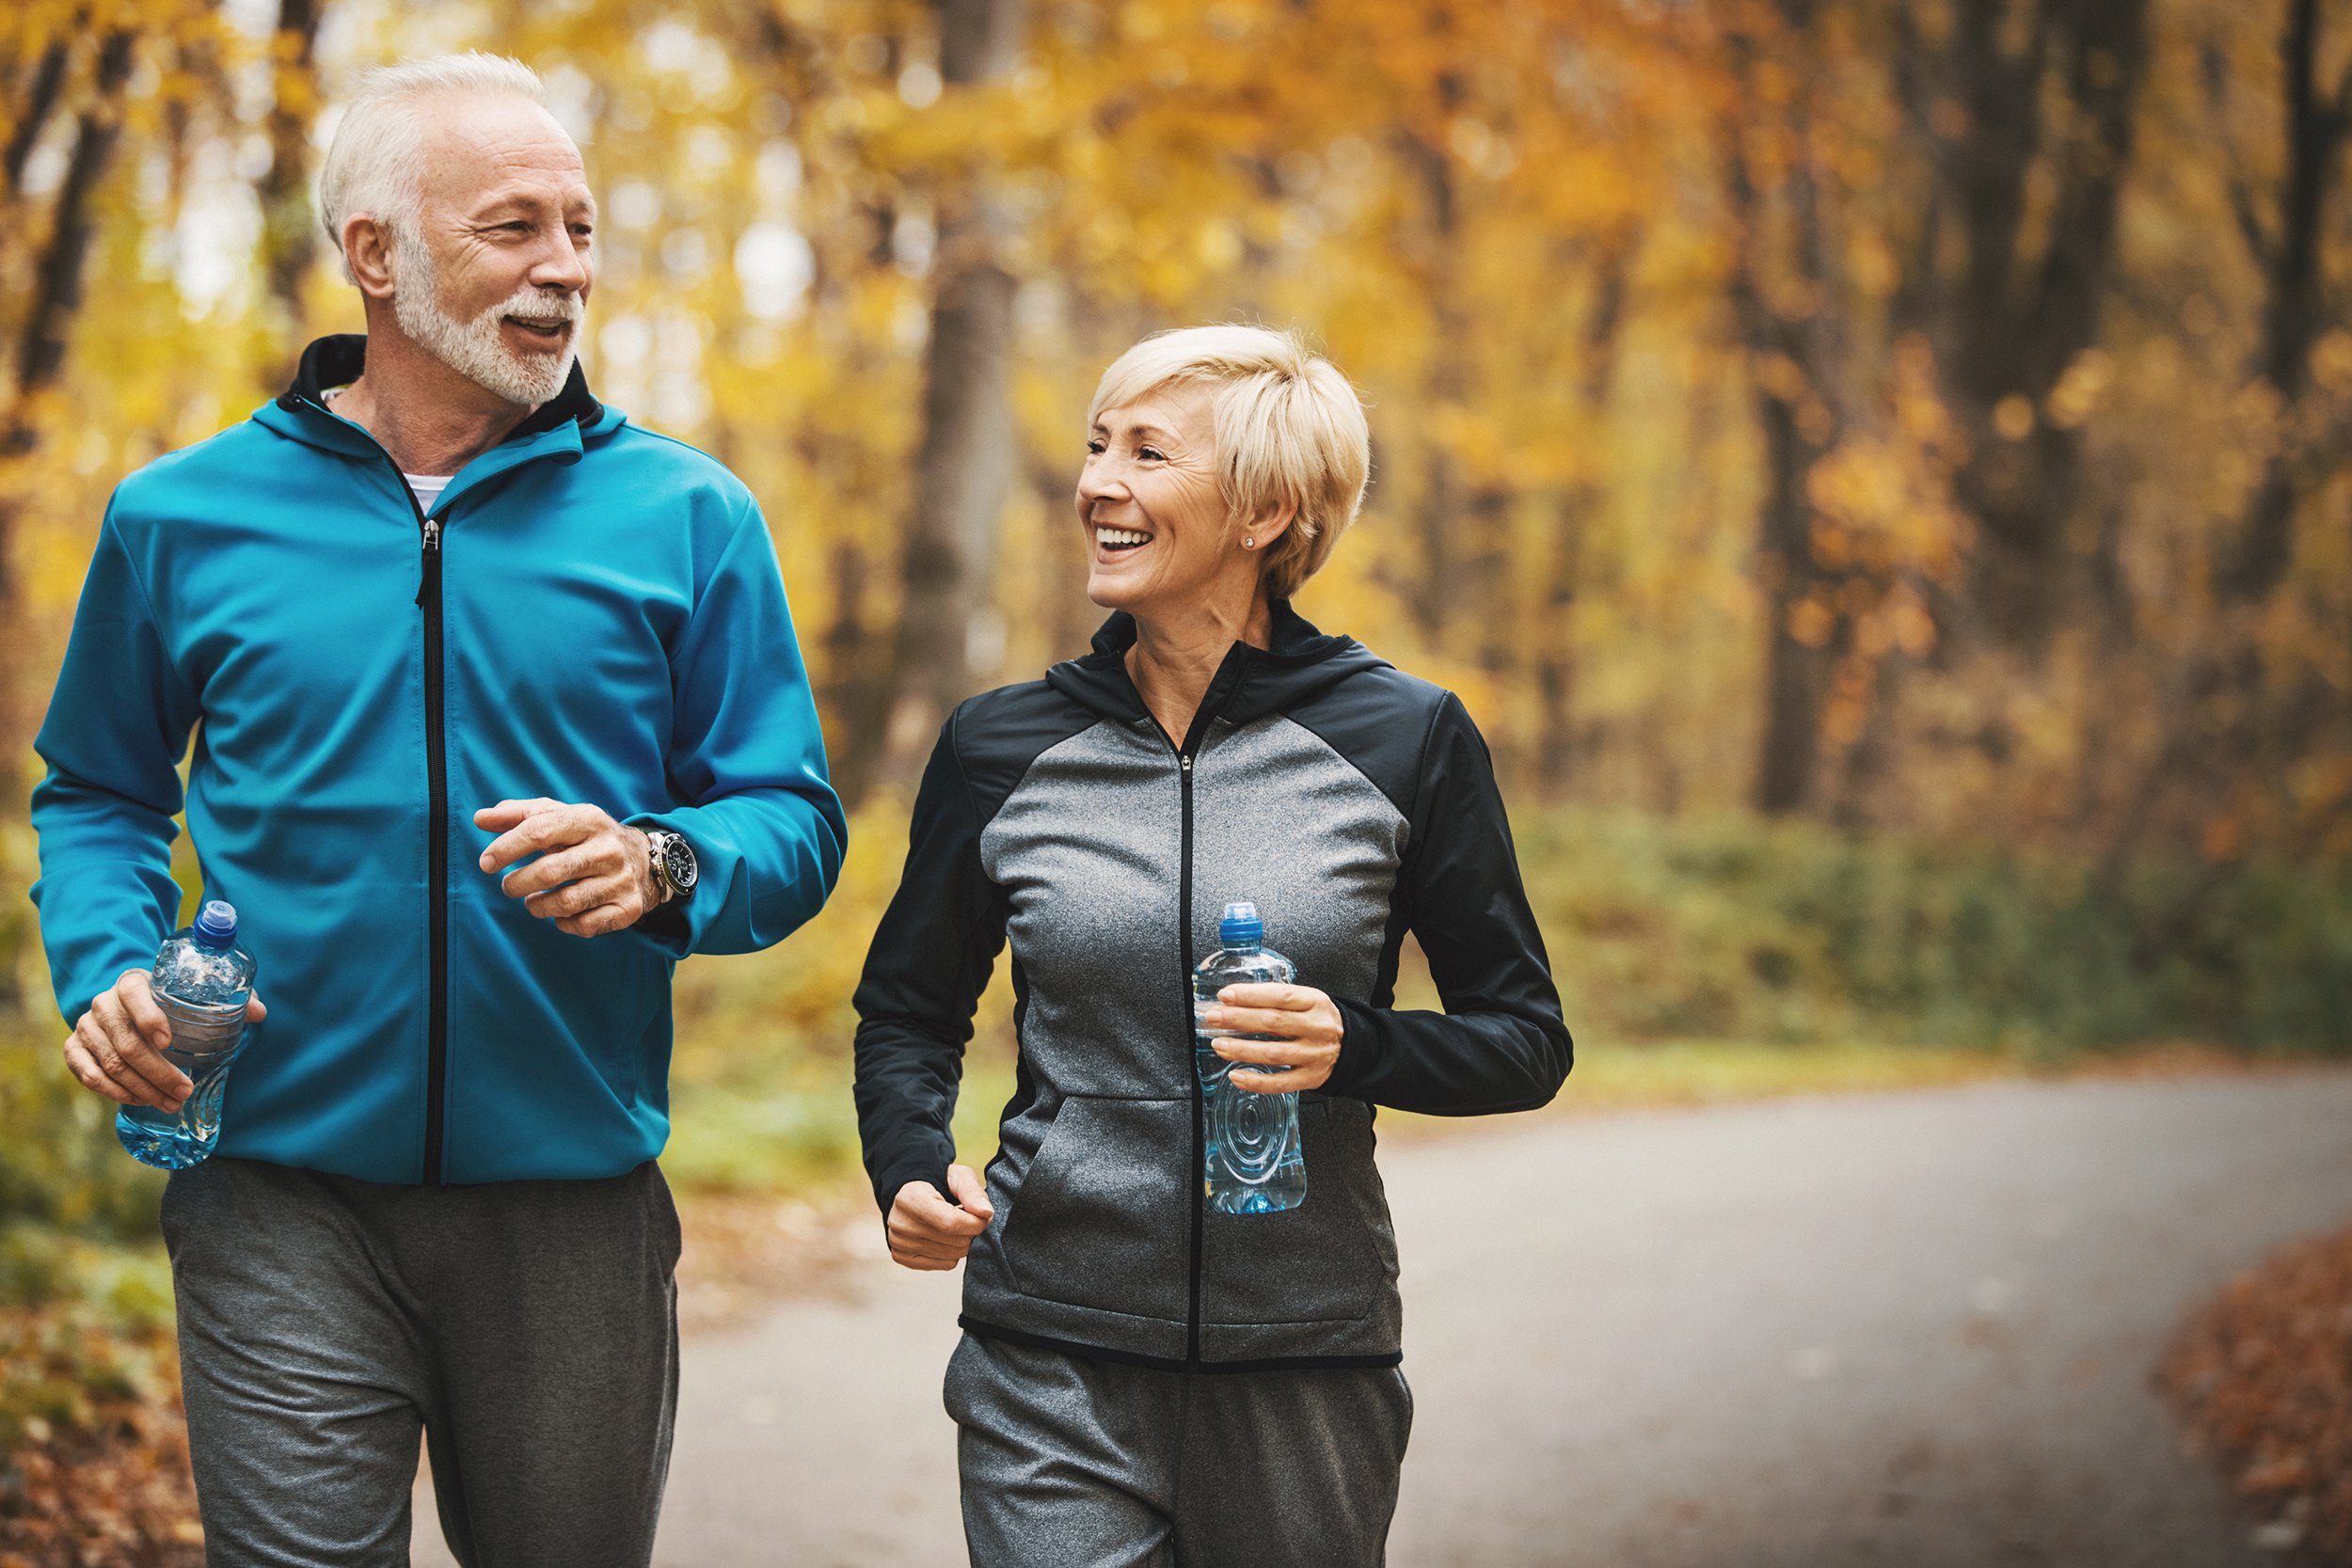 <p>Exercising regularly is important at any age, but it's <a href="https://www.cdc.gov/nccdphp/sgr/olderad.htm">especially important as we get older</a>. Moderate physical activity, preferably daily, can help maintain healthy muscles, bones, and joints; reduce the risk of heart disease and high blood pressure; improve your sense of well-being and fight depression; and can help you maintain your independence while reducing the risk of falling. While we may not be able to maintain the same rigorous routines into our 80s and 90s, there are still plenty of safe and <a href="https://blog.cheapism.com/exercises-for-seniors/">healthy activities for seniors</a>, including walking, swimming, and aerobics. </p>